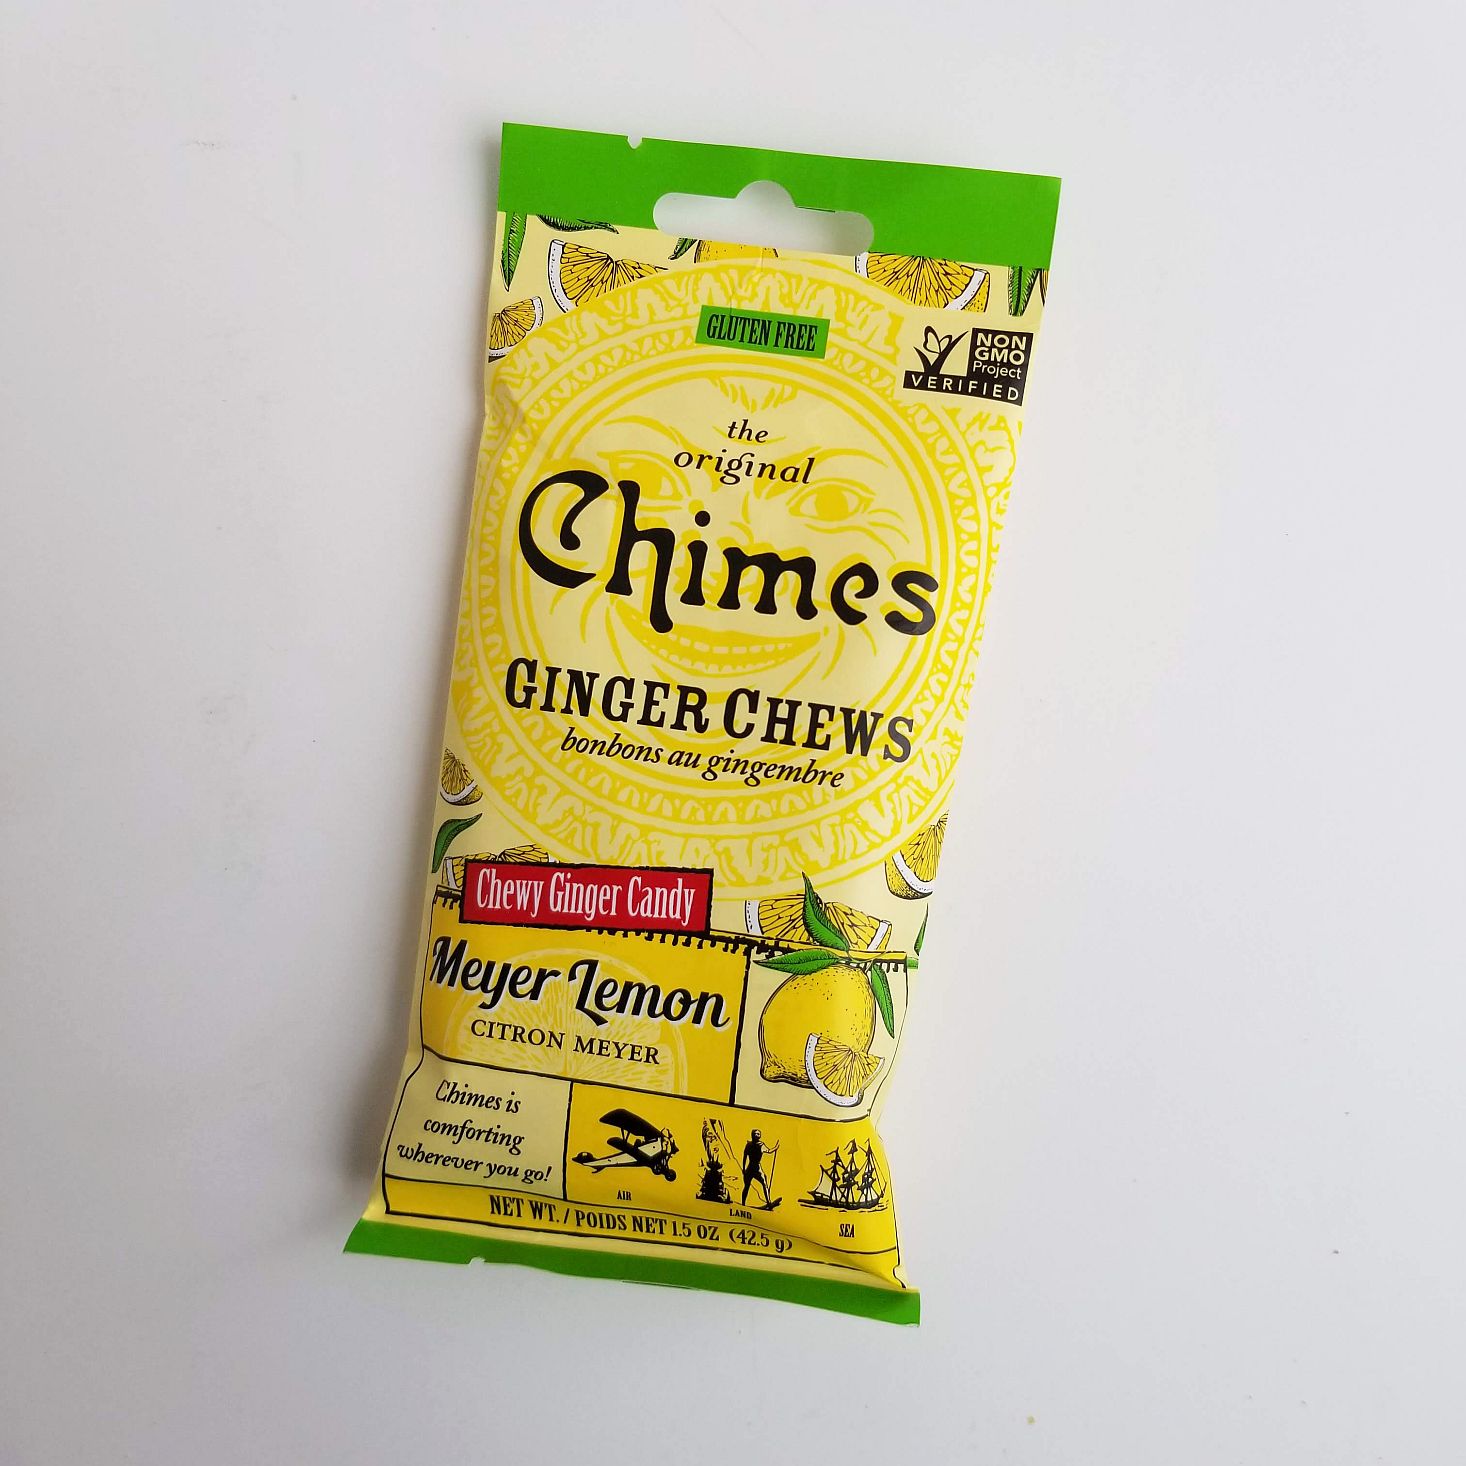 Snack Nation January 2020 Ginger chews